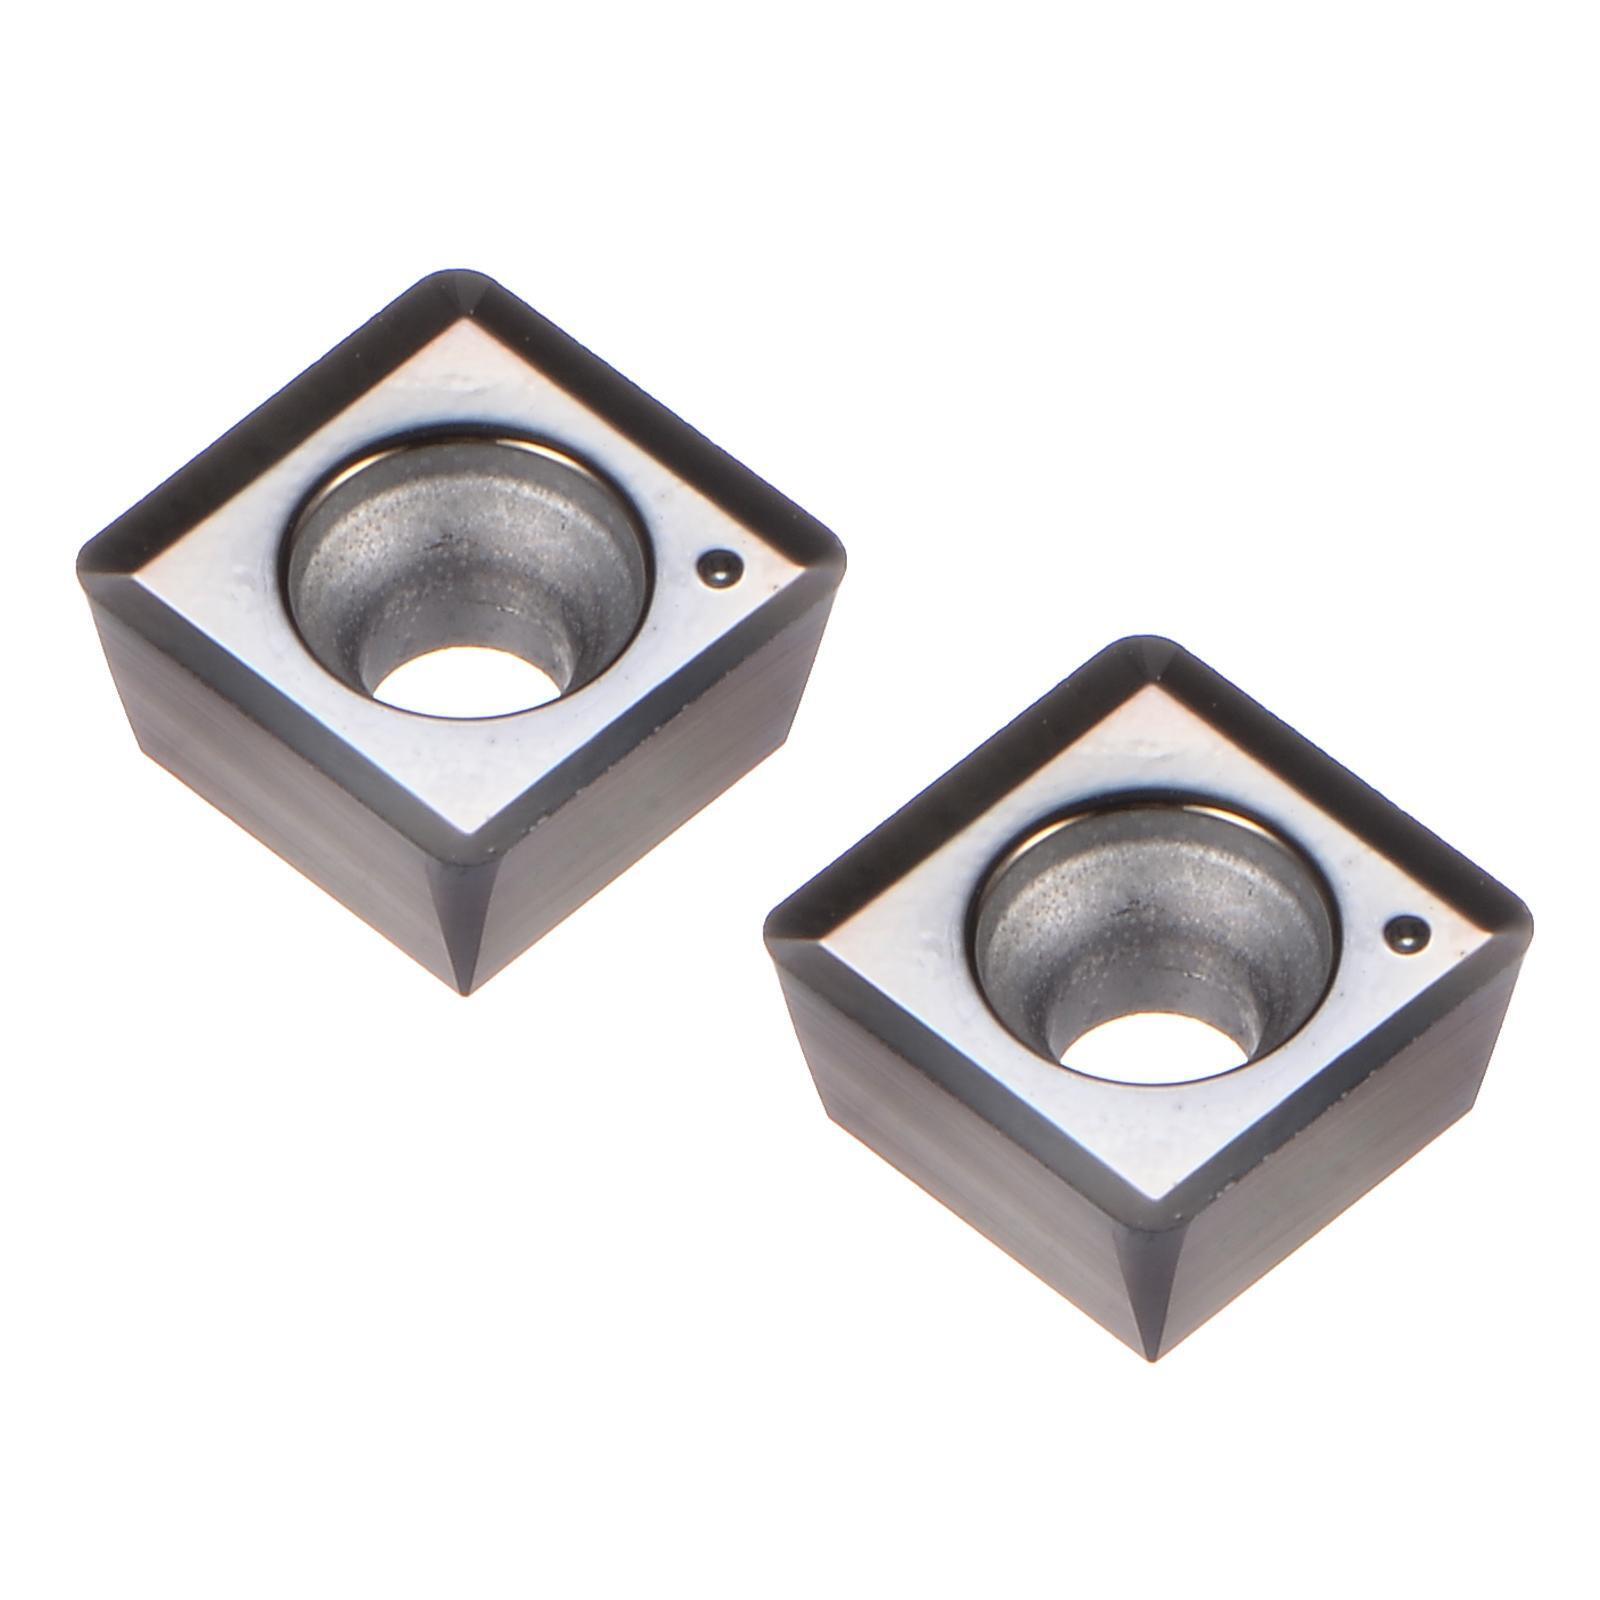 2pcs Carbide Turning Inserts Spmg07t308 Yh01 Cnc Lathe Indexable For Holder